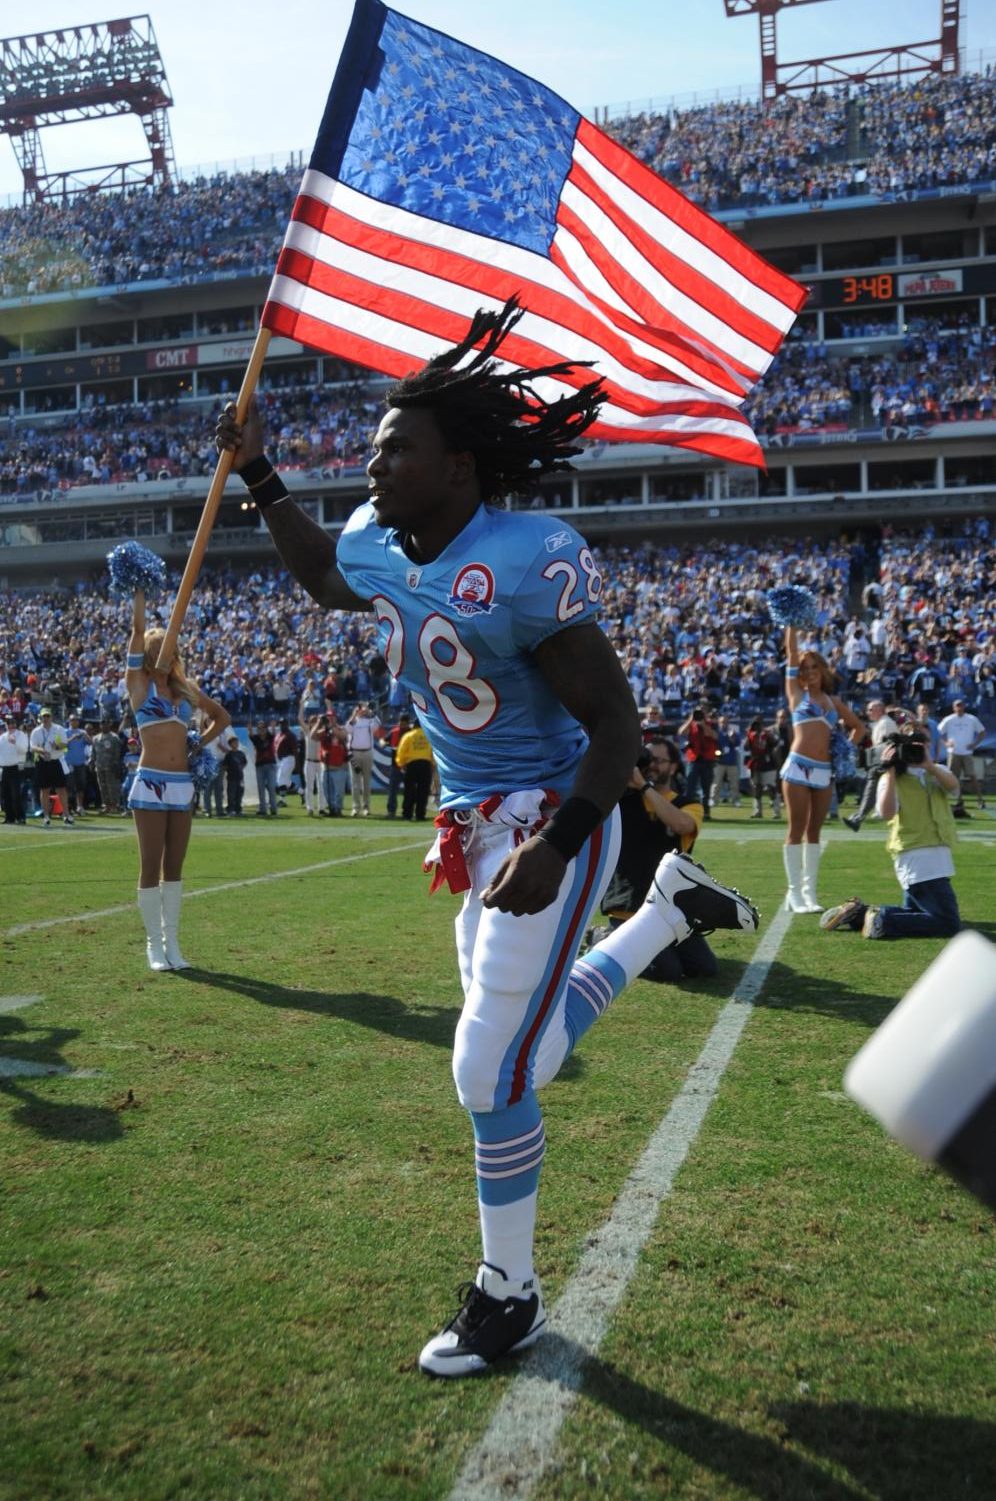 Touchdown+Titans%21+The+NFL+marks+20+years+in+Tennessee